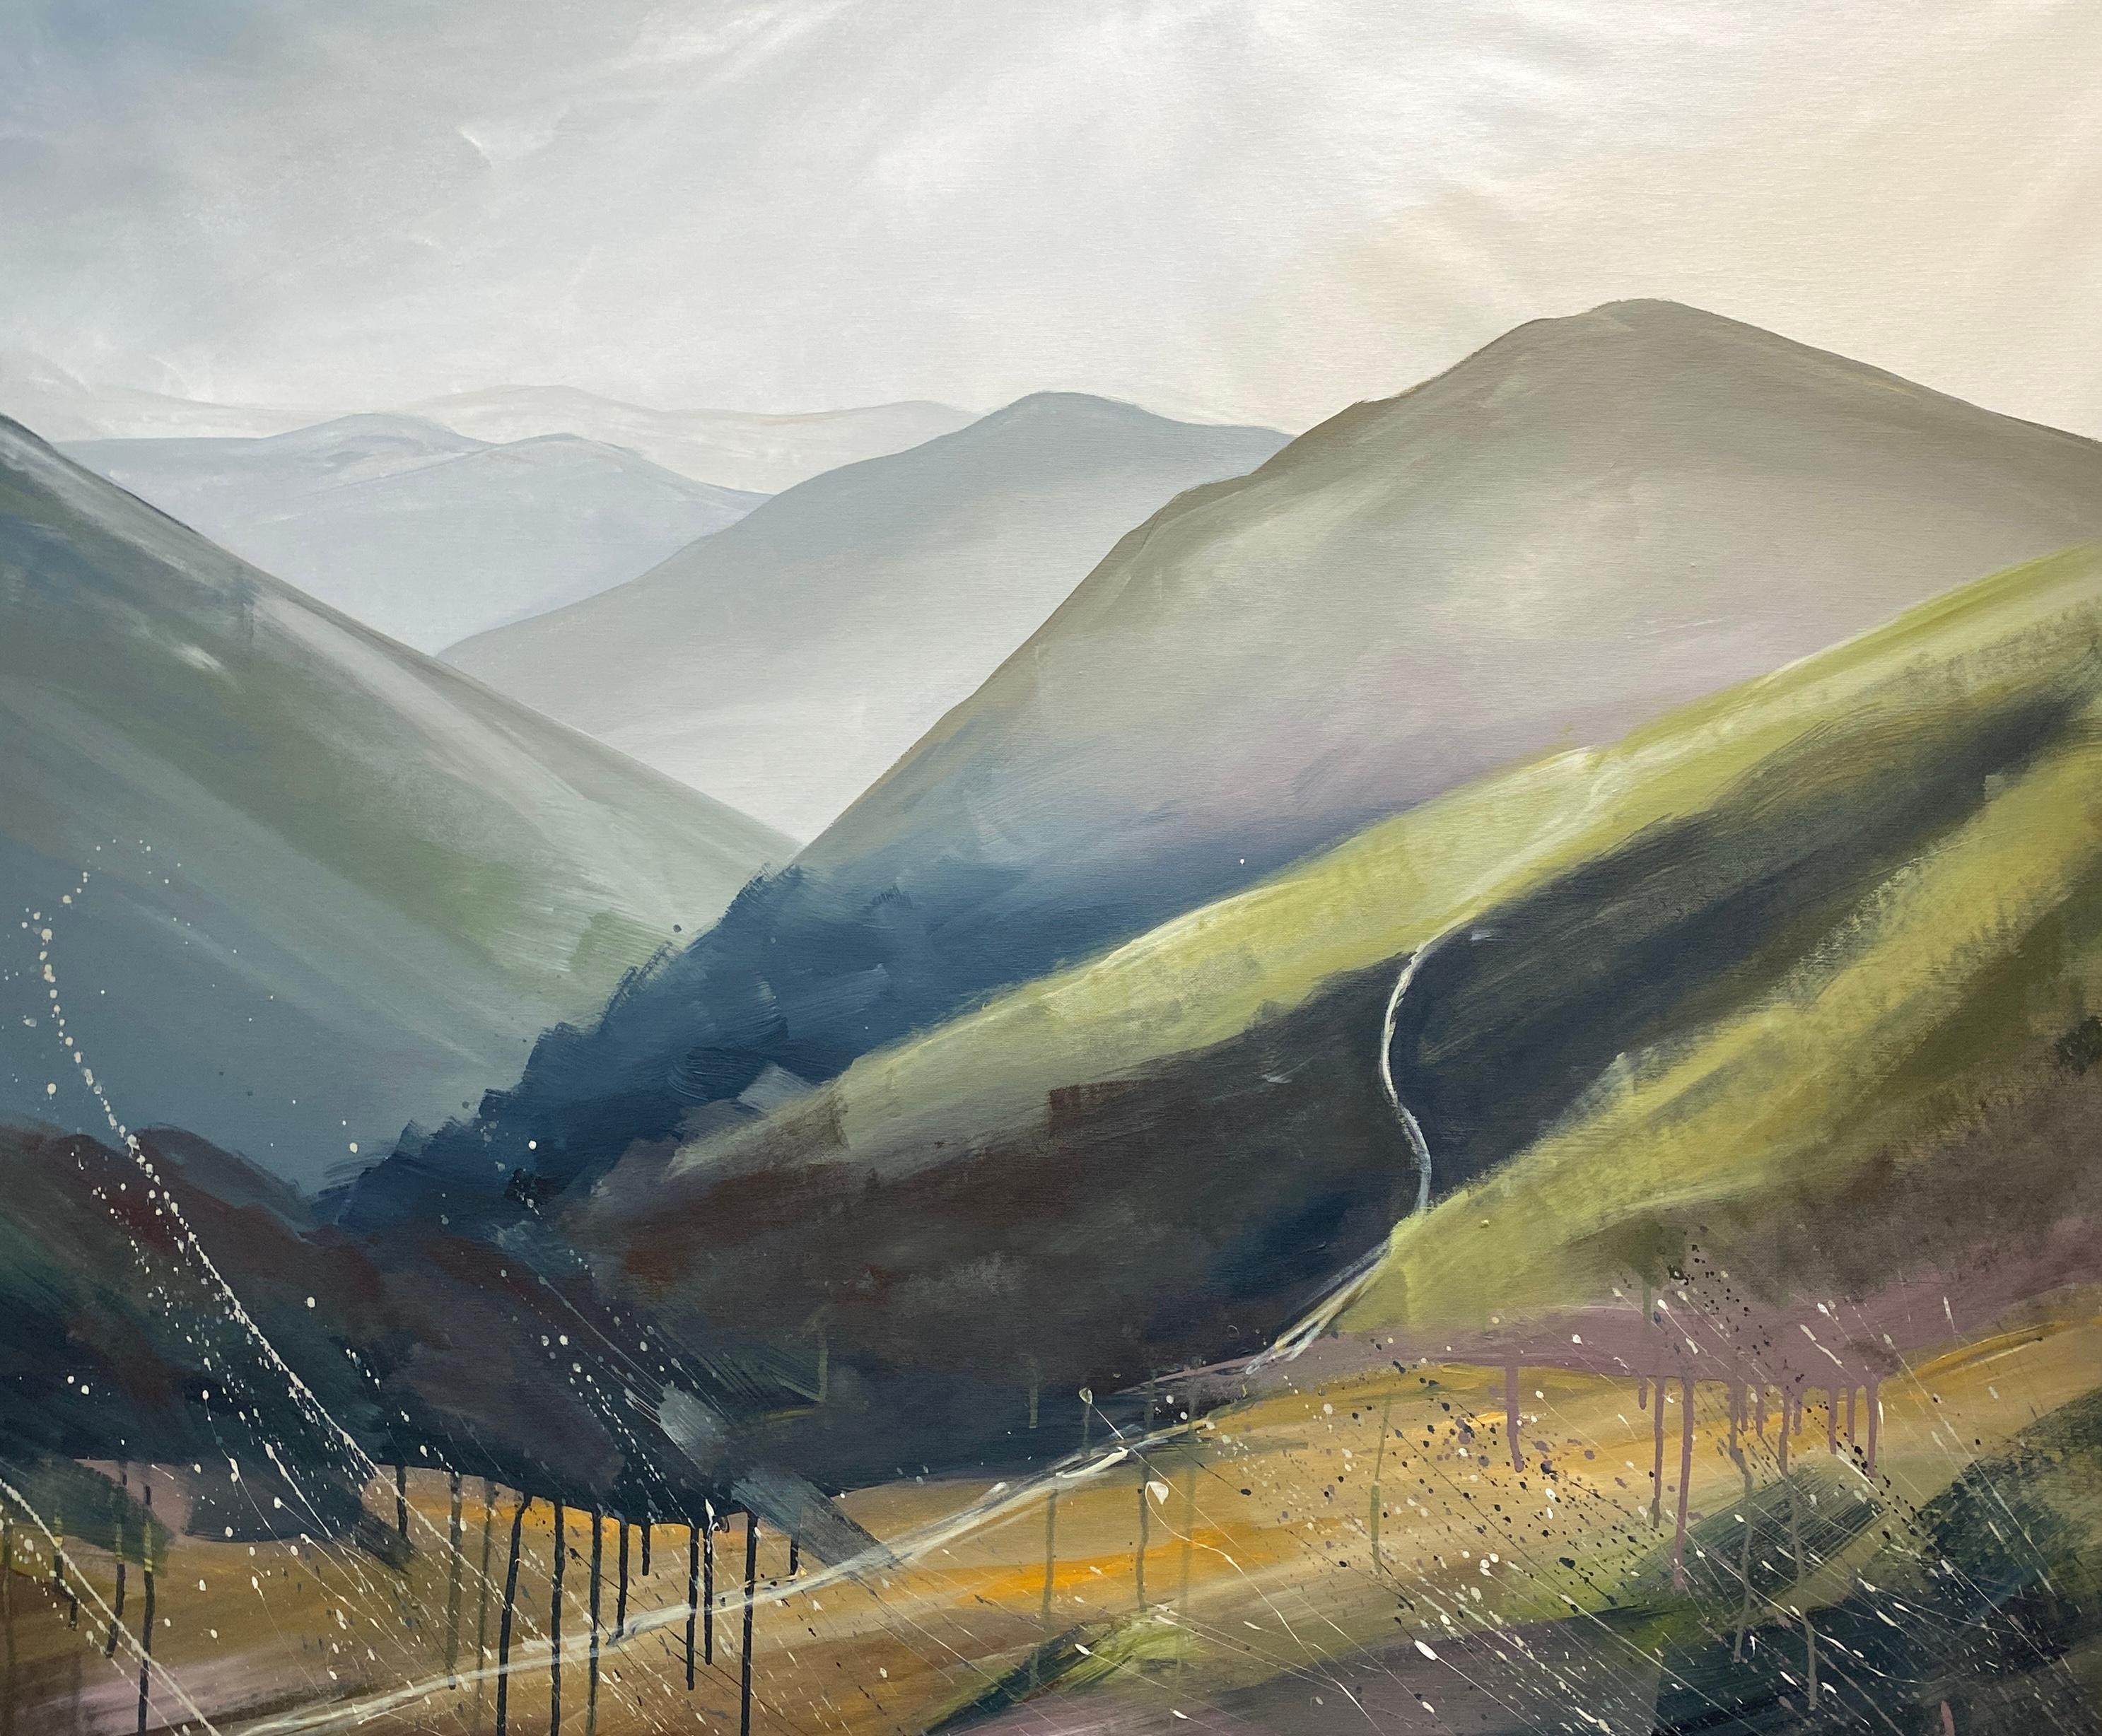 HELEN MOUNT Landscape Painting - "The Way Home" 